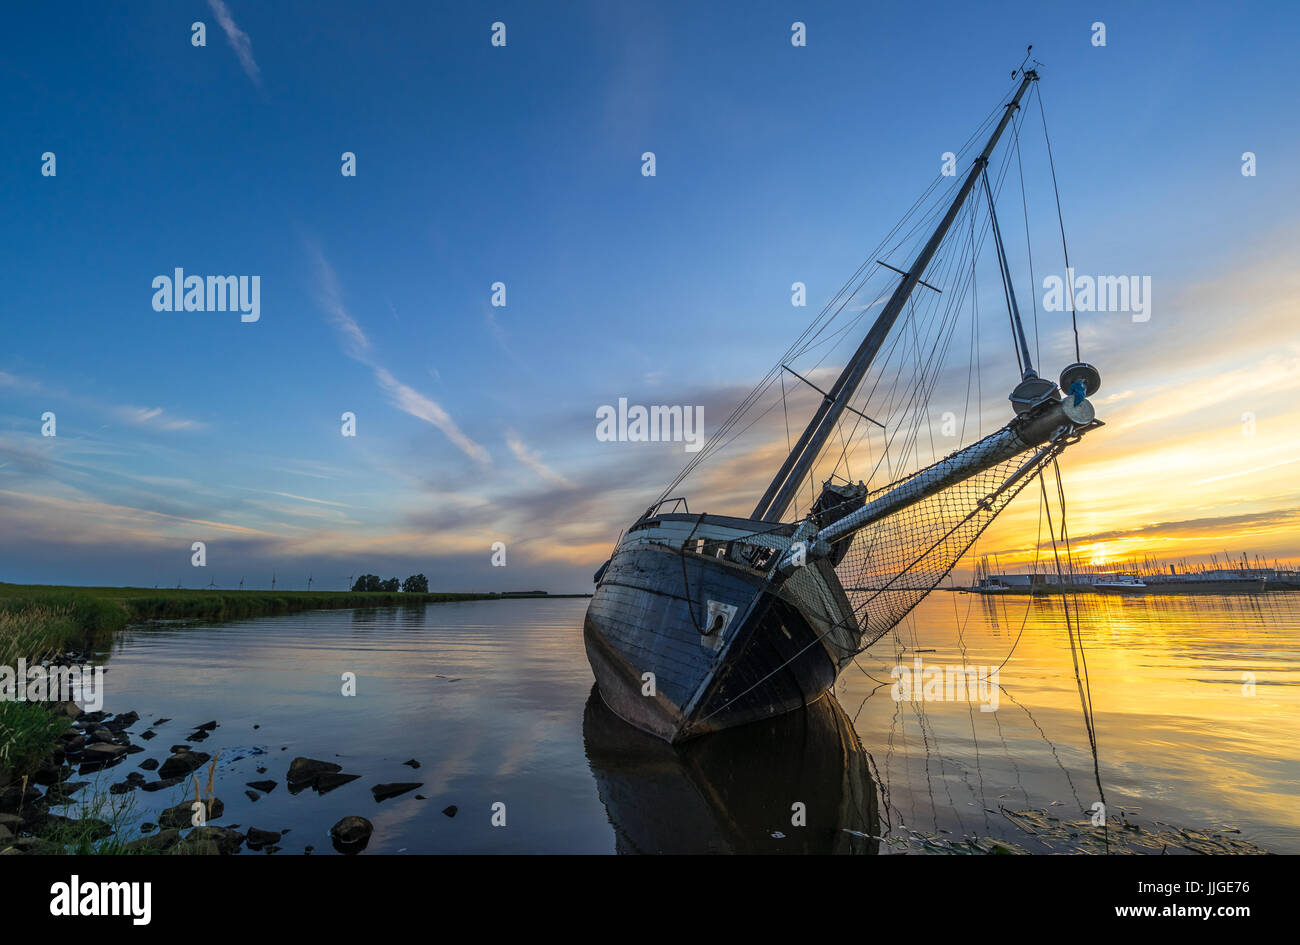 Scenic sunset at a stranded sailing boat near Lemmer, the Netherlands Stock Photo